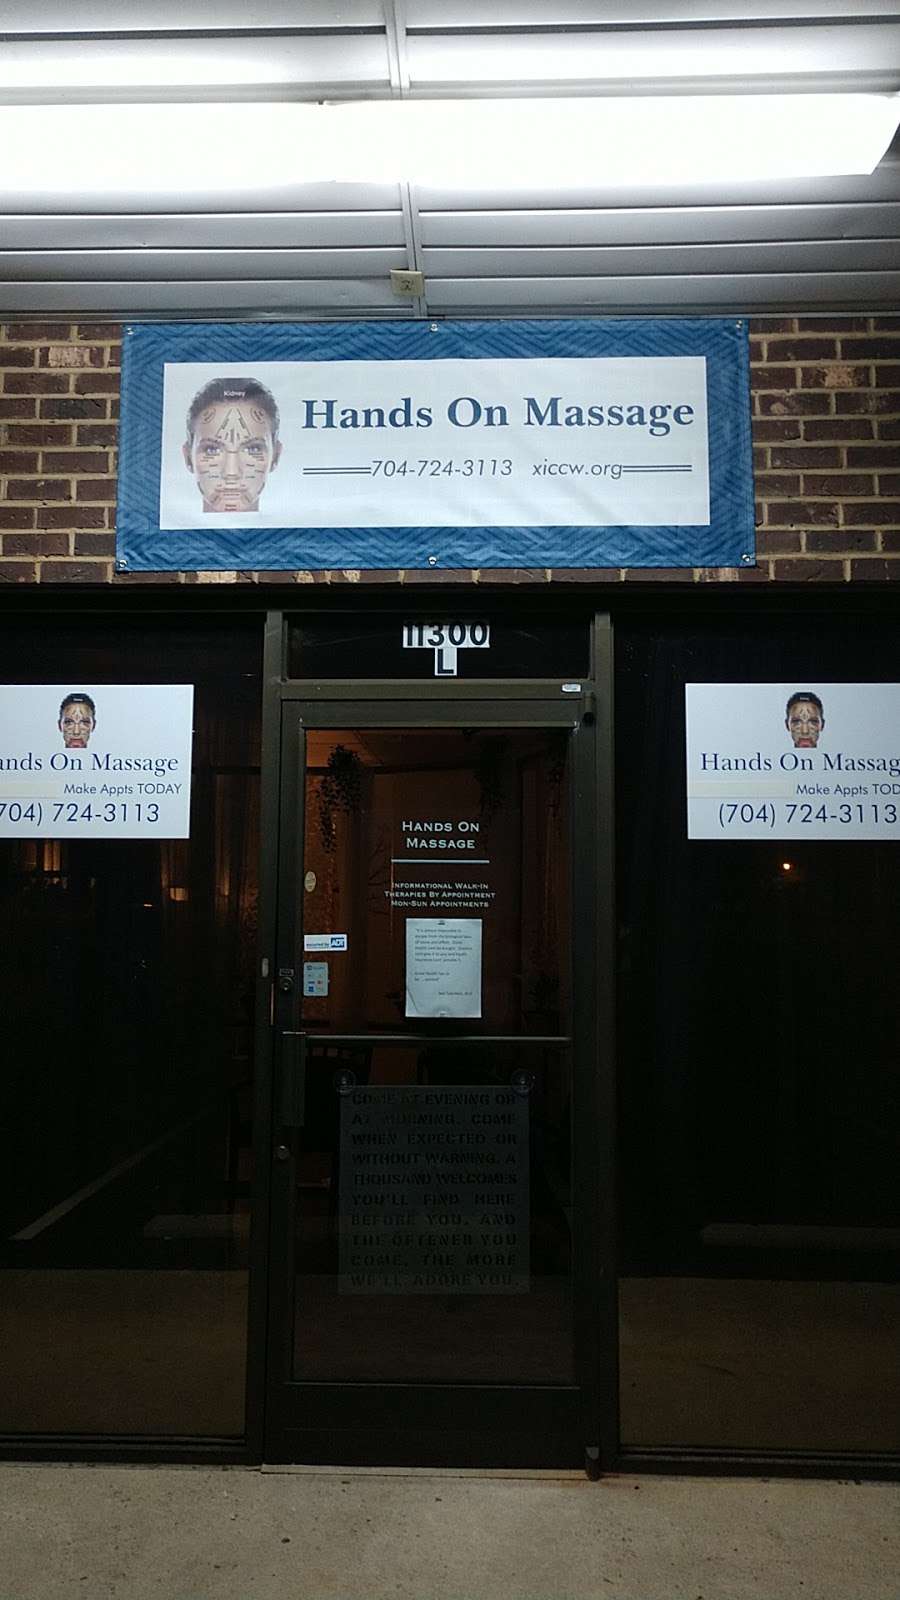 Hands On with Corrective Care Wellness | 11300 - L, Lawyers Rd, Mint Hill, NC 28227, USA | Phone: (704) 724-3113